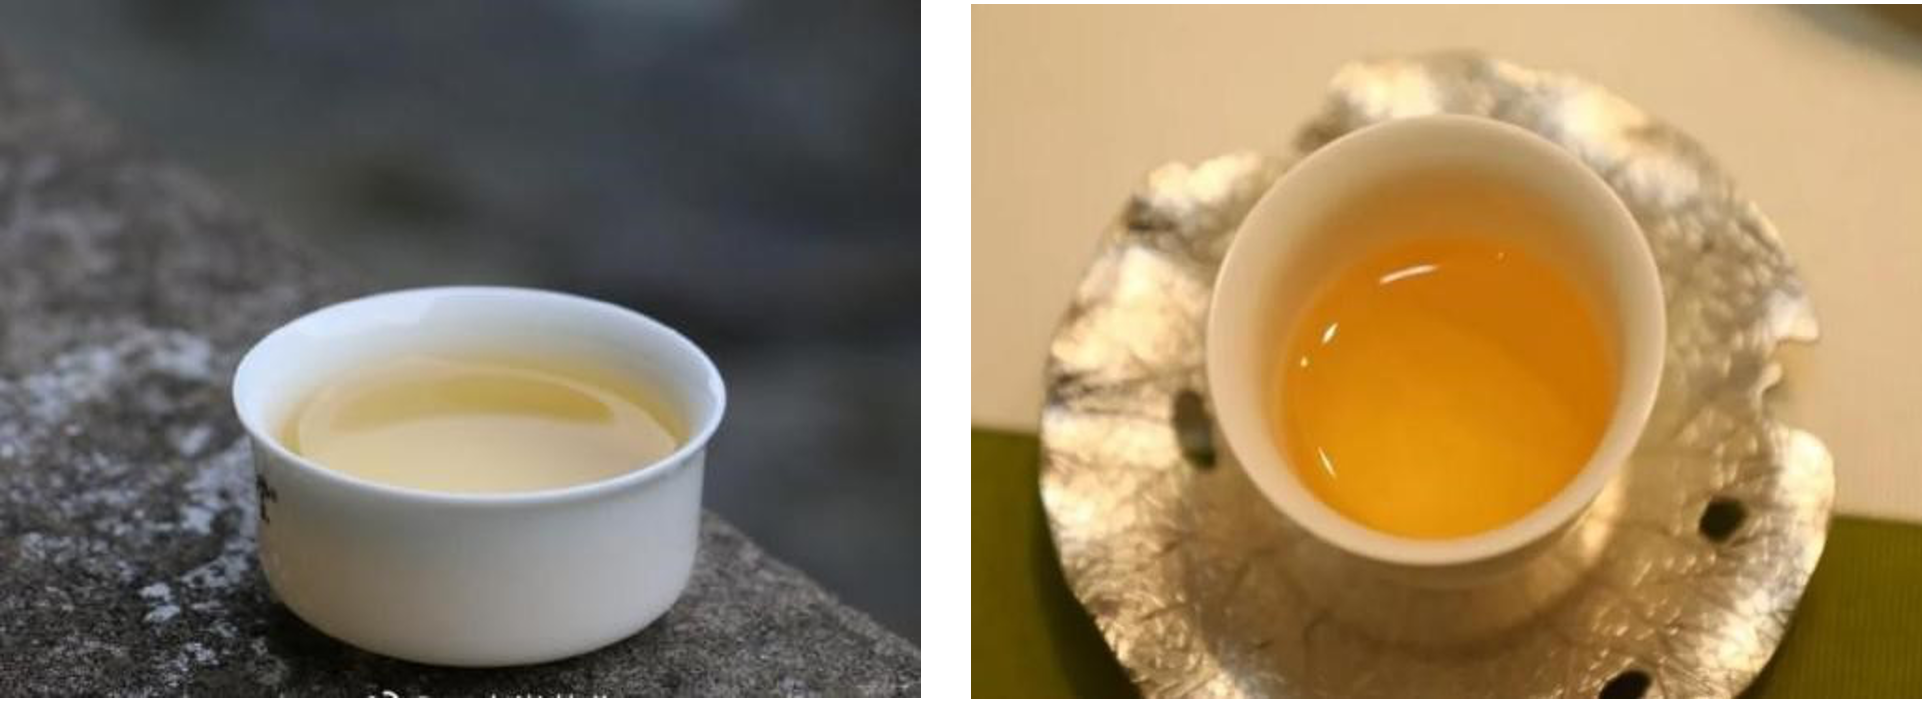 What is cloudy after cold in black tea?